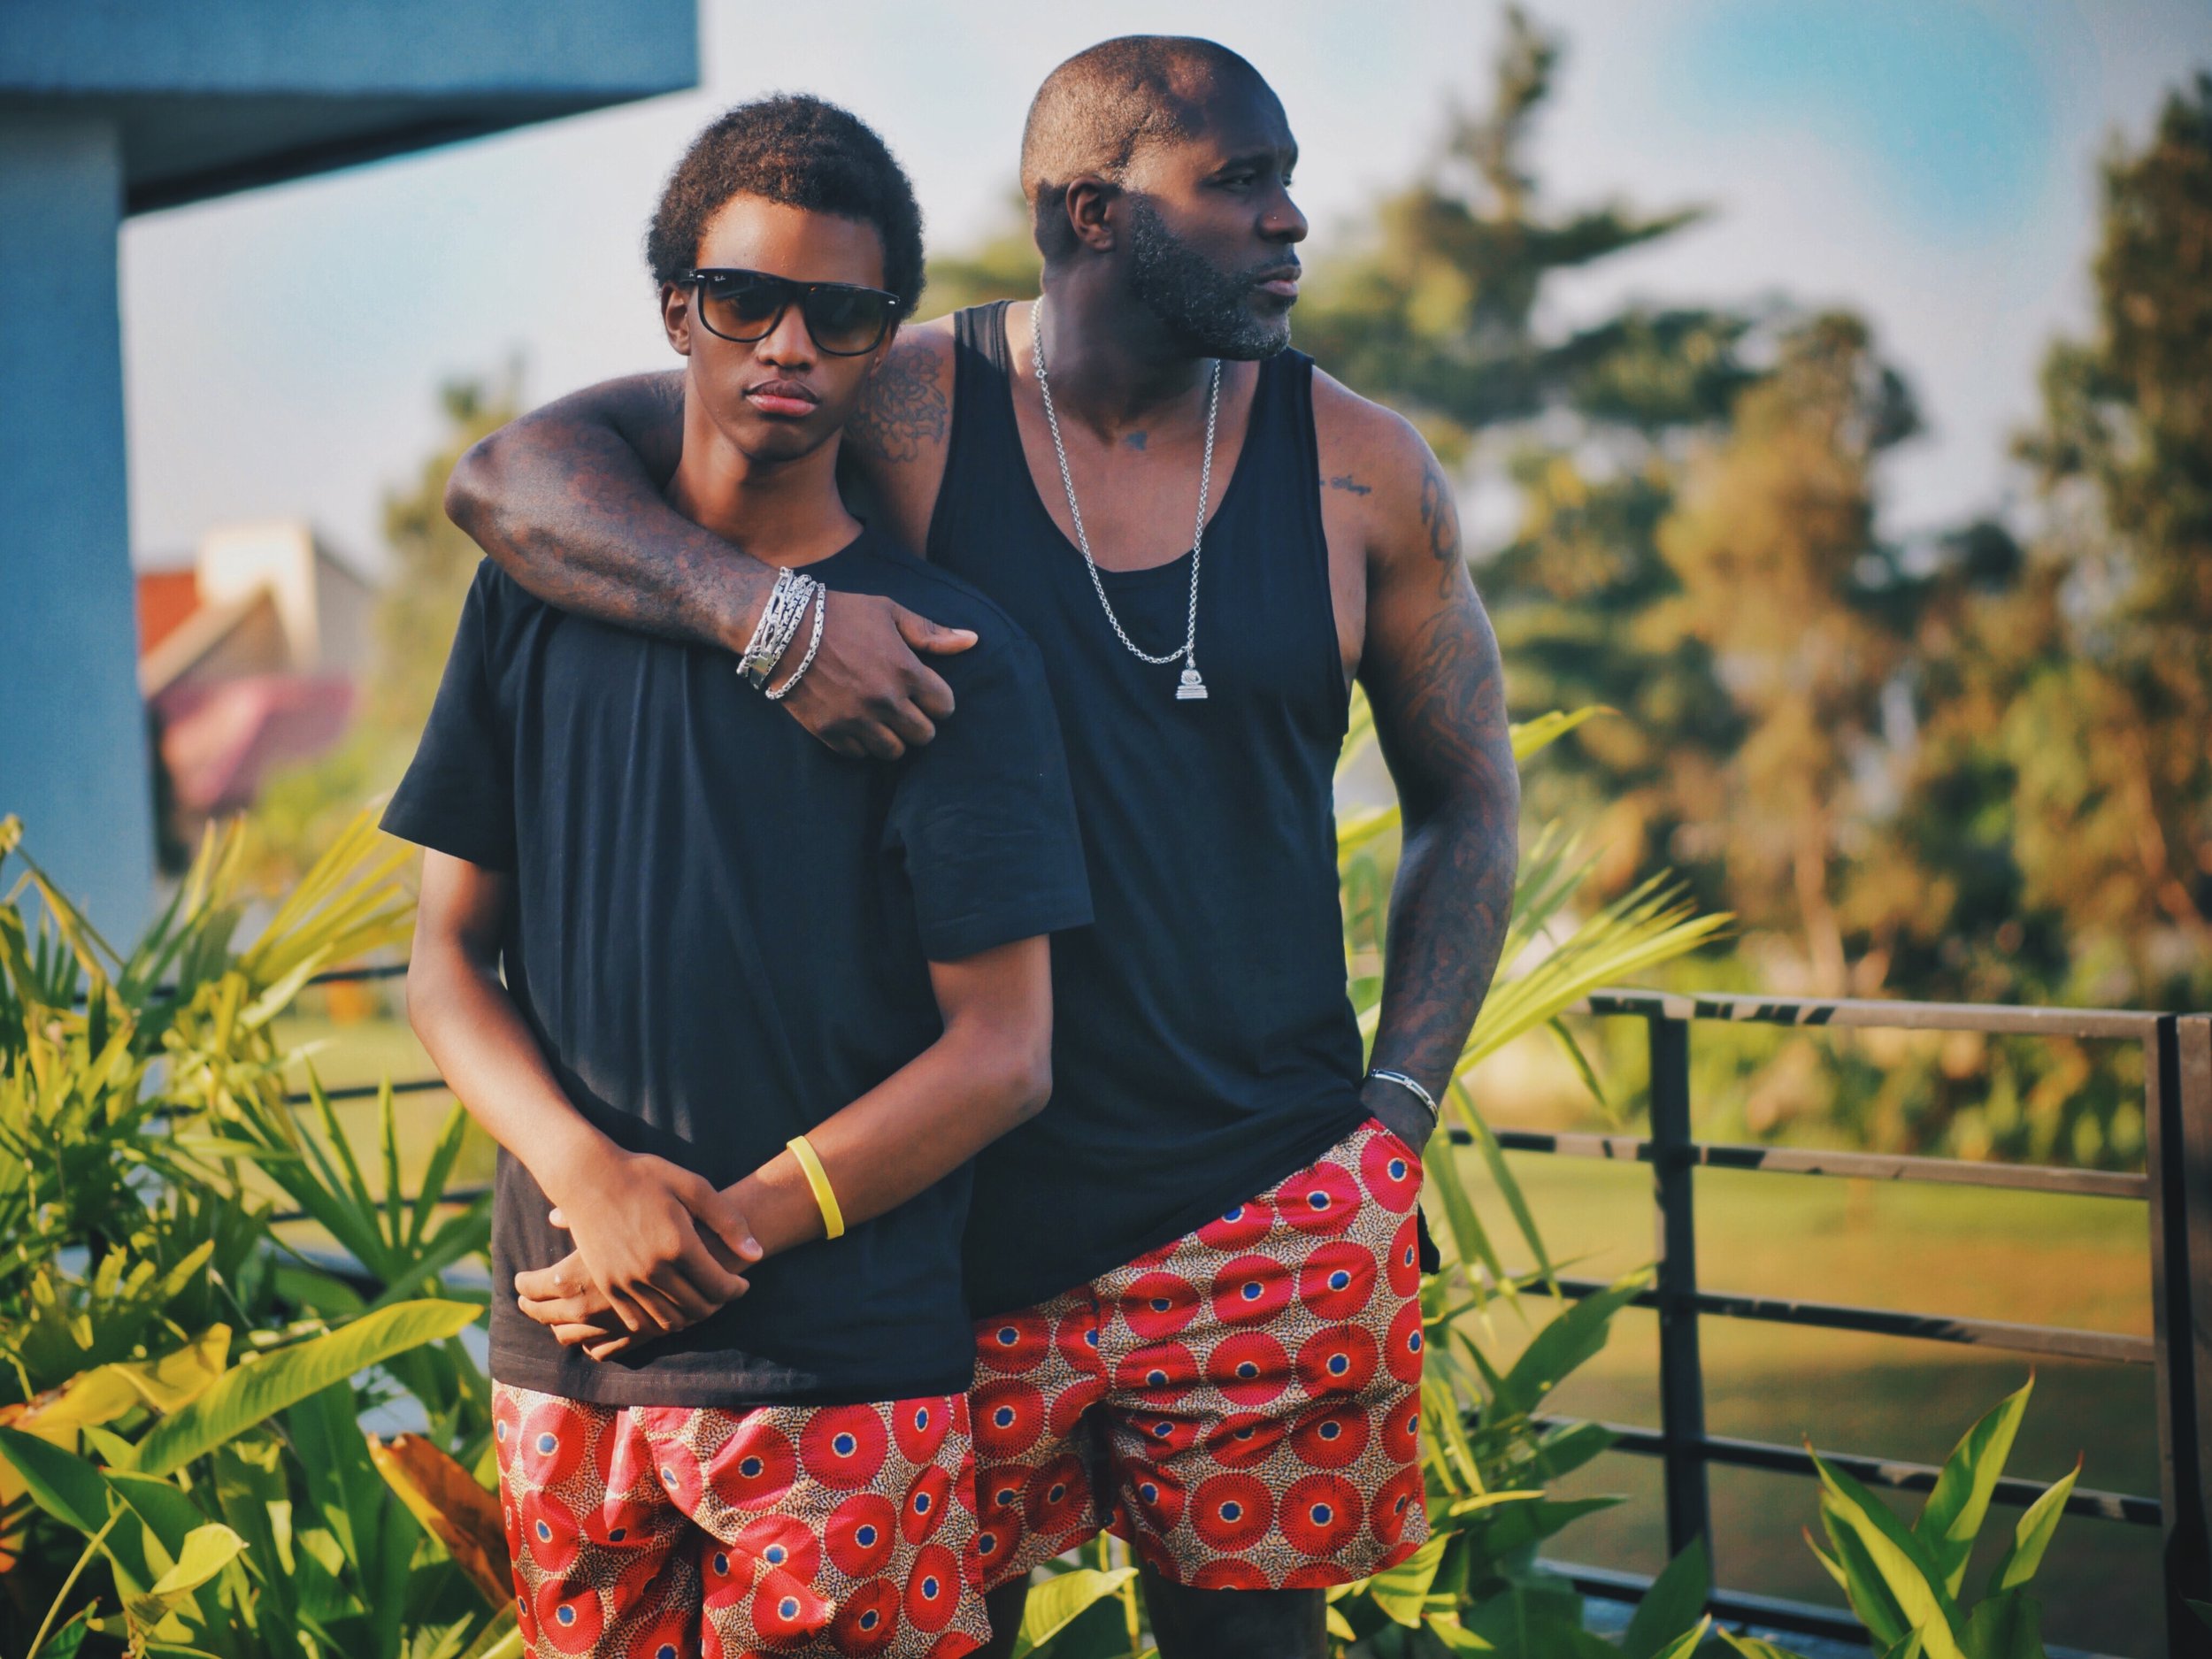  Two male-presenting Black people with matching outfits. They are both wearing black tops and red pants with a circle pattern. The person in the back has their arm around the person in front and is looking to their left. The person in front is starin